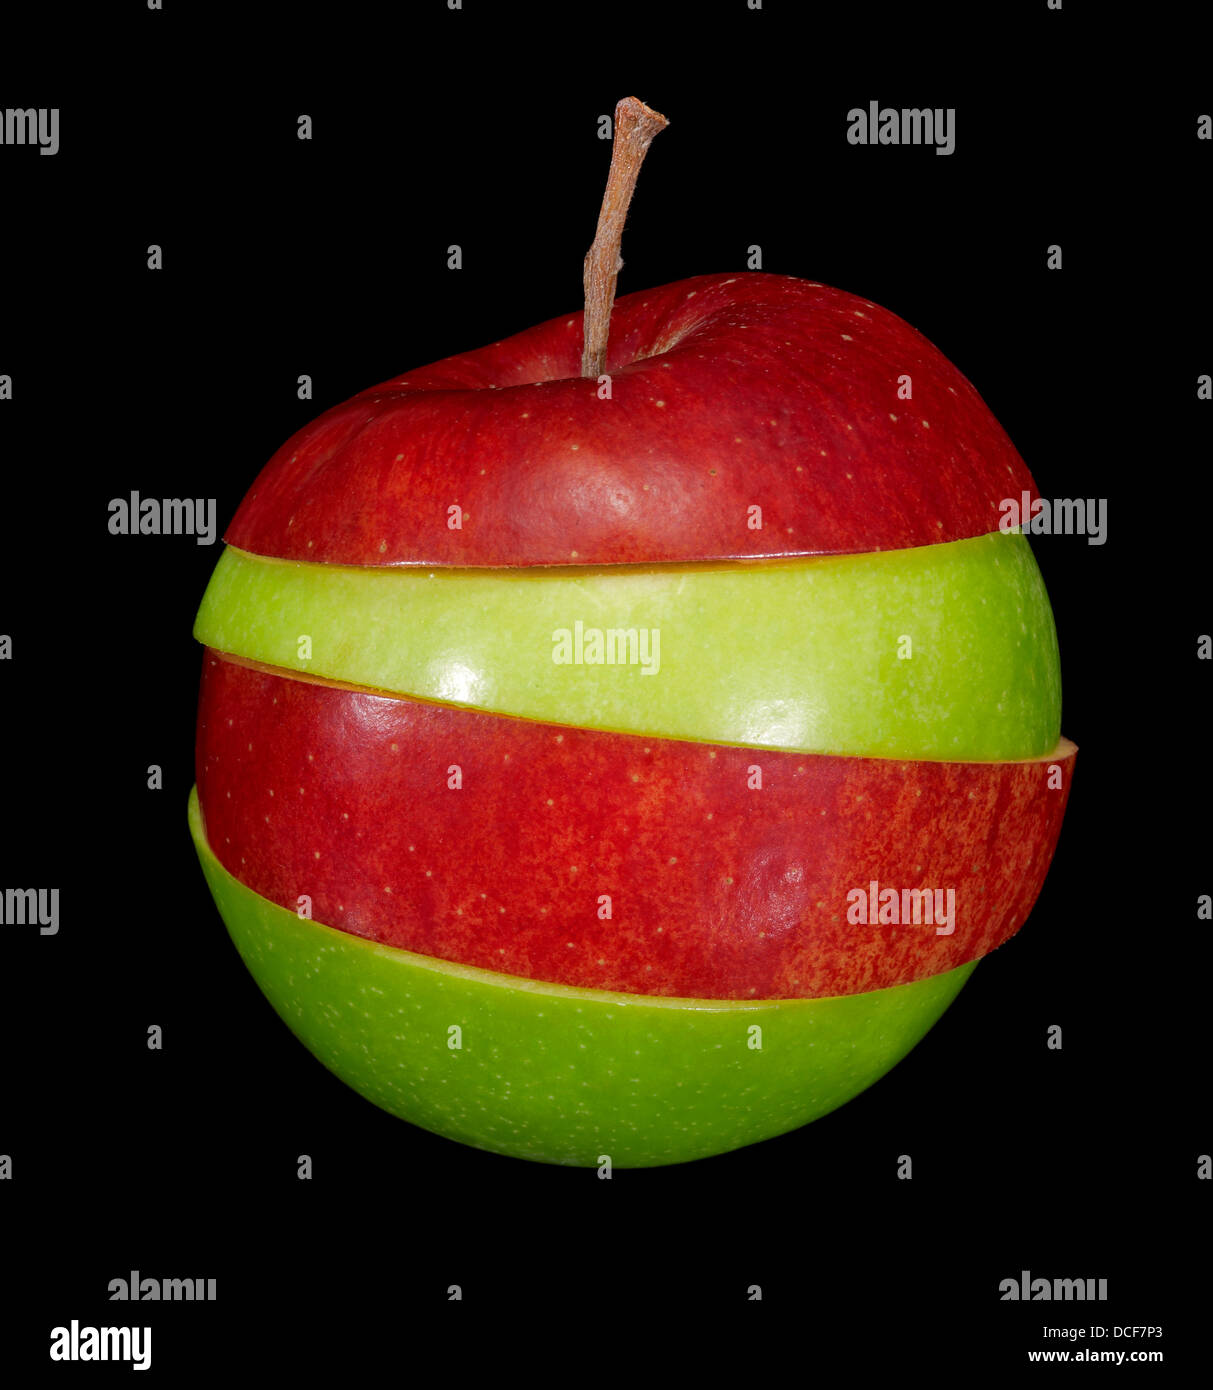 composite fruit made of red and green apple slices in black back Stock Photo